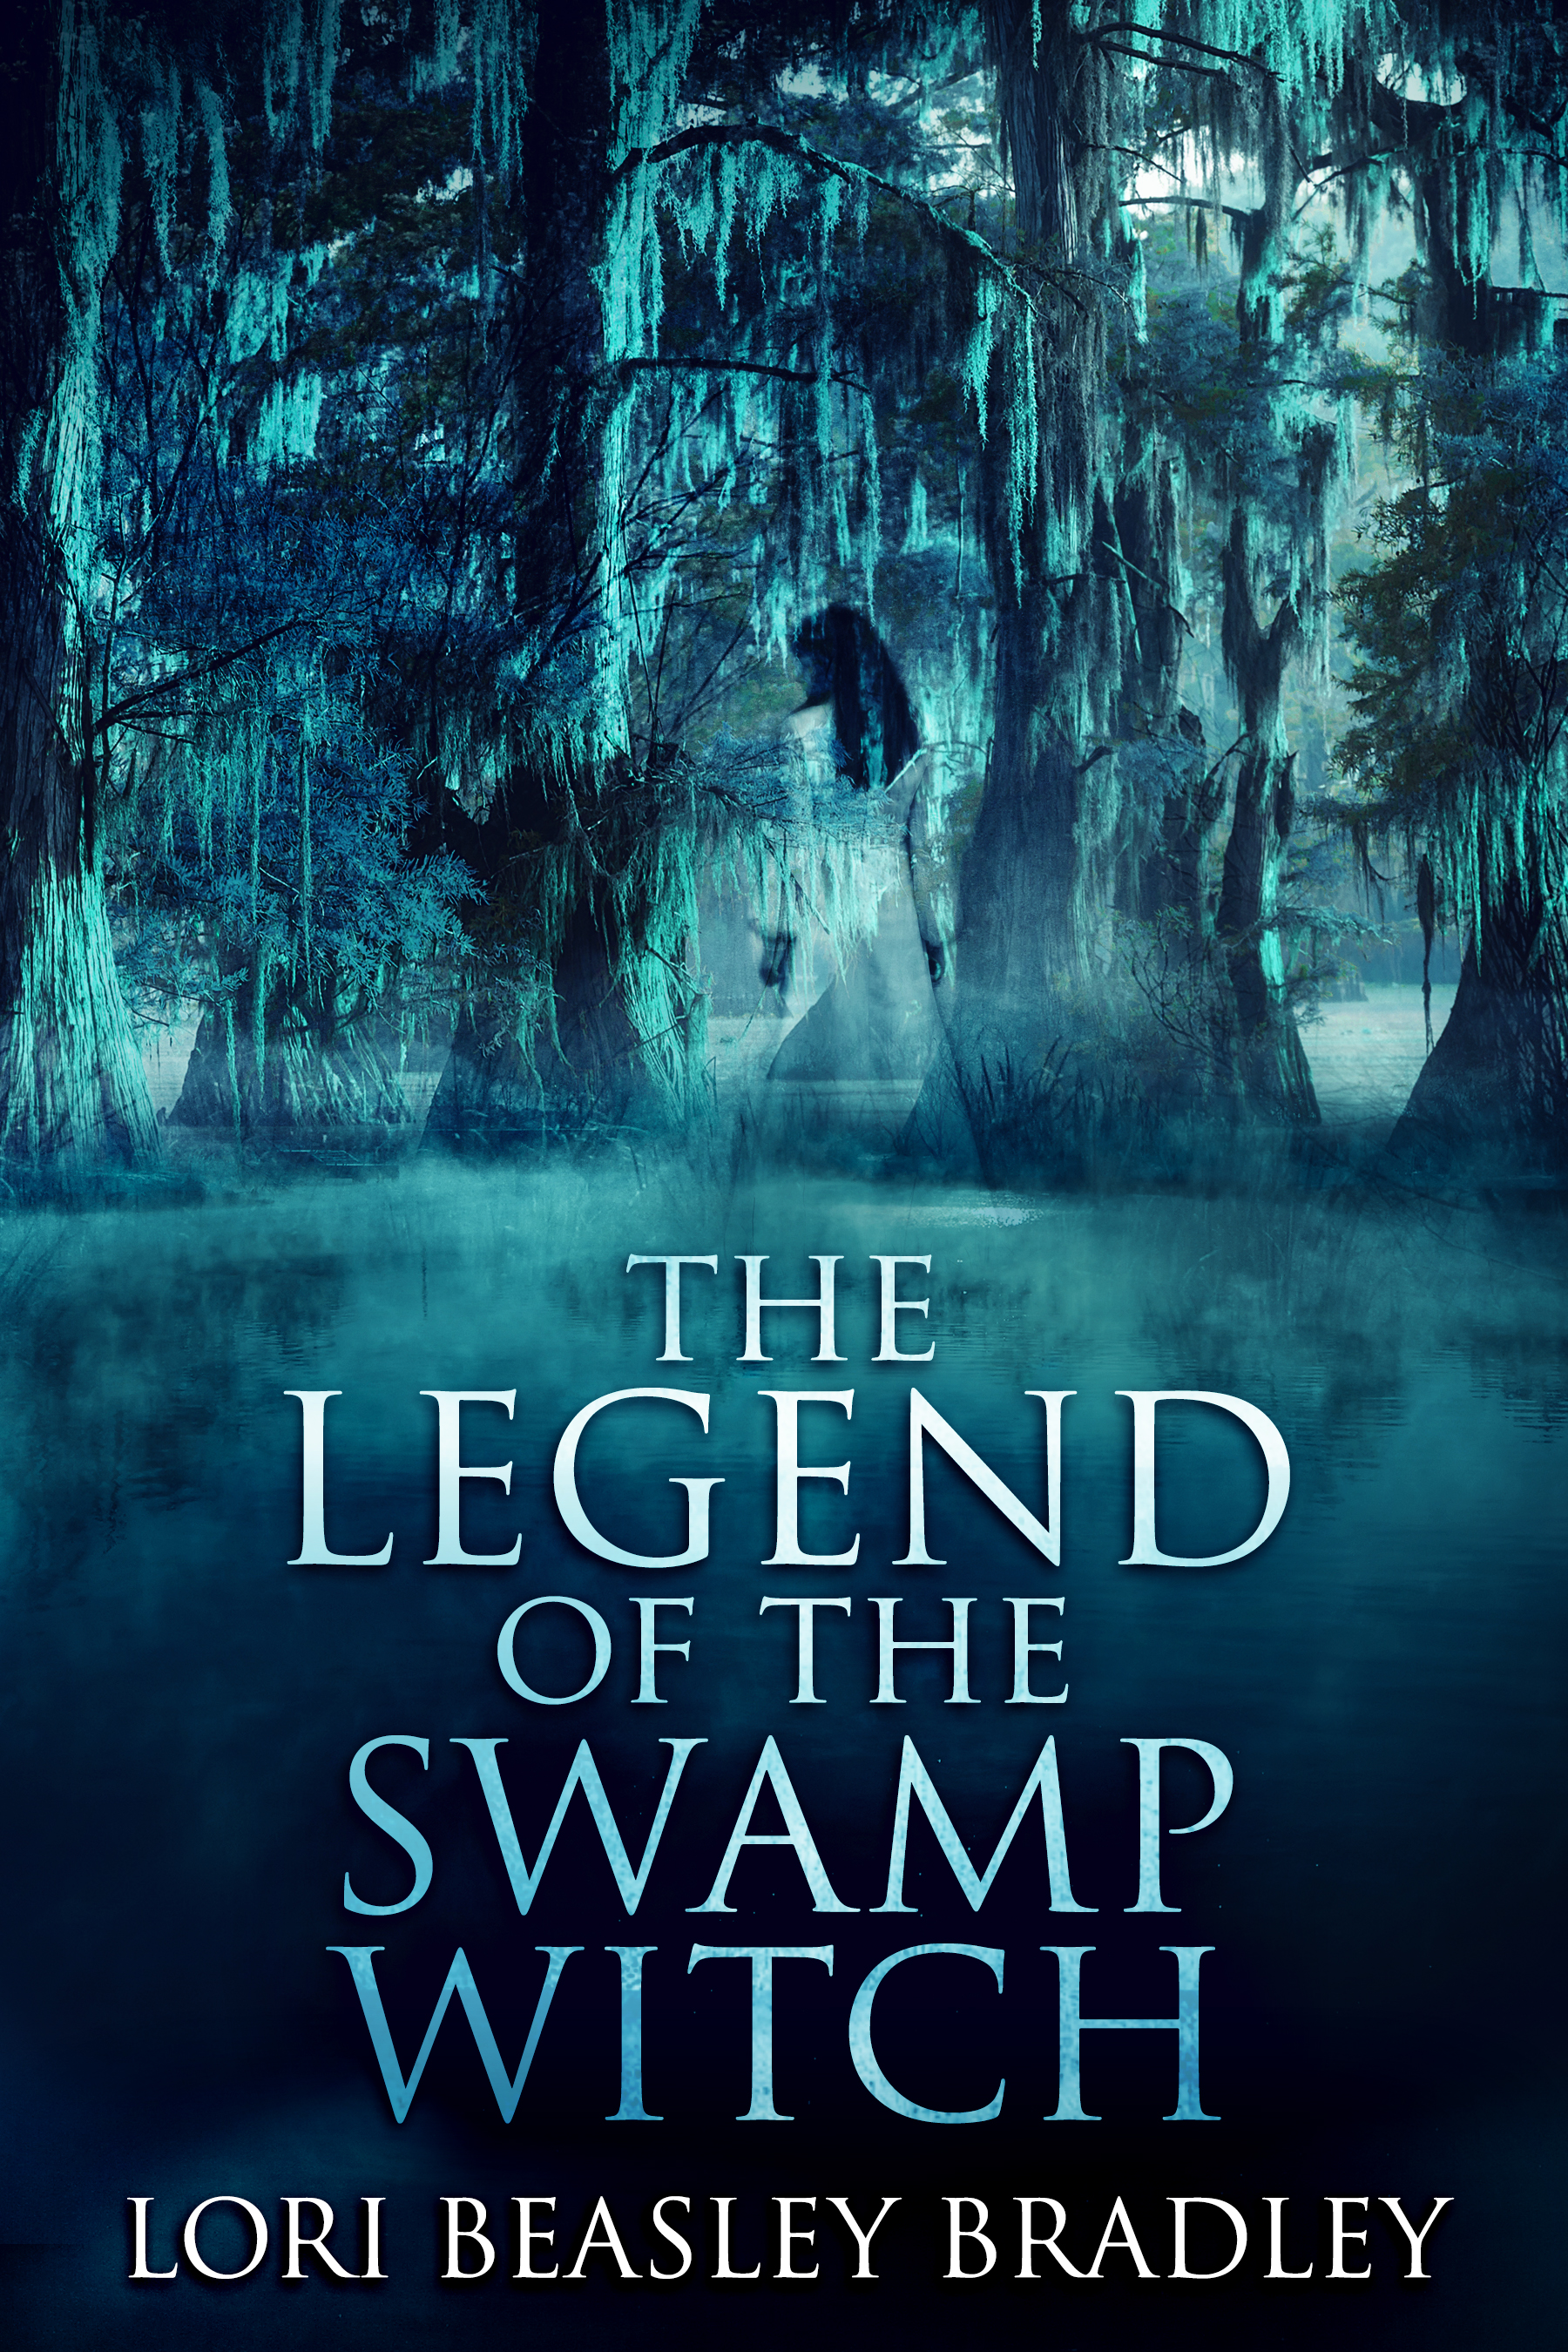 FREE: The Legend Of The Swamp Witch by Lori Beasley Bradley